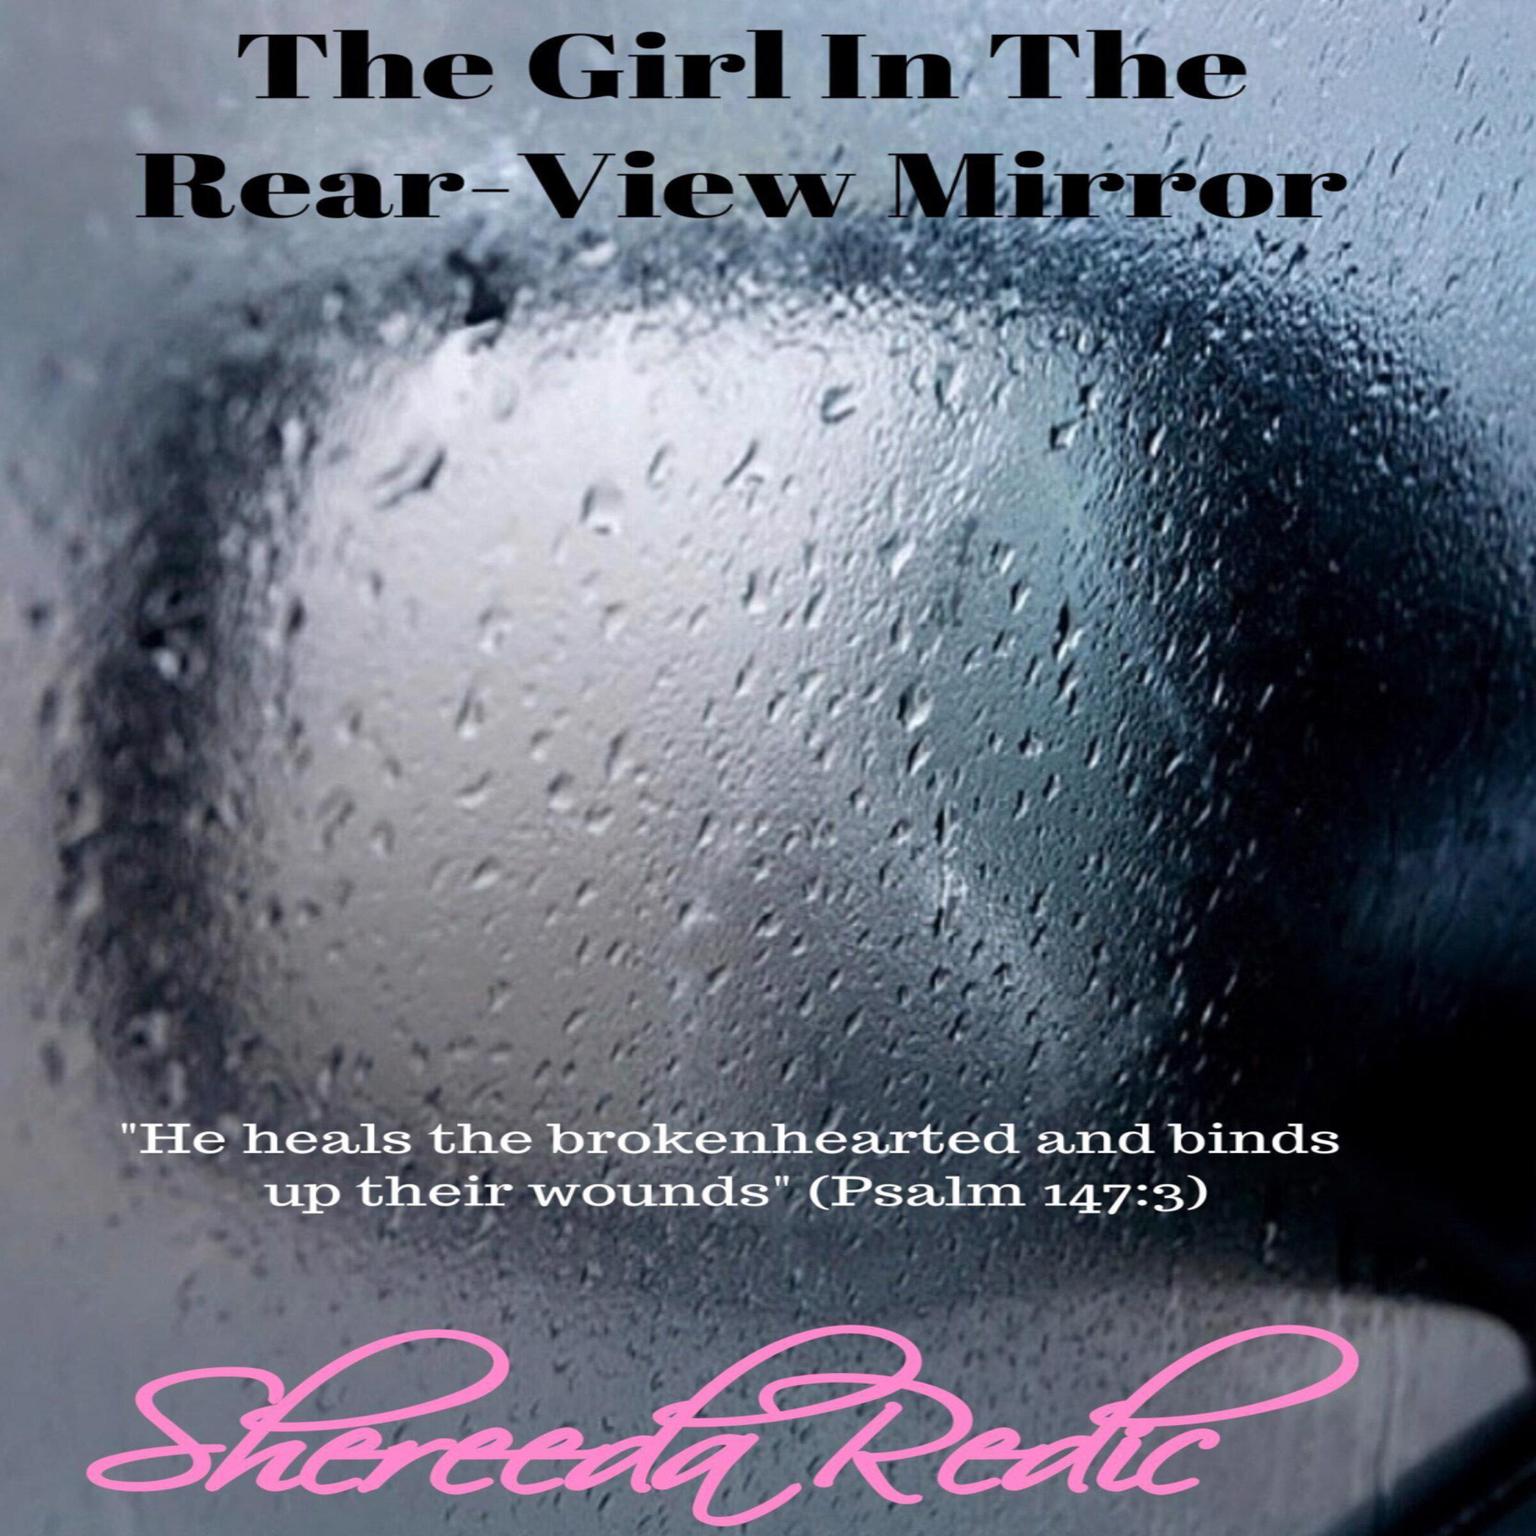 The Girl In The Rear-View Mirror Audiobook, by Shereeda Redic